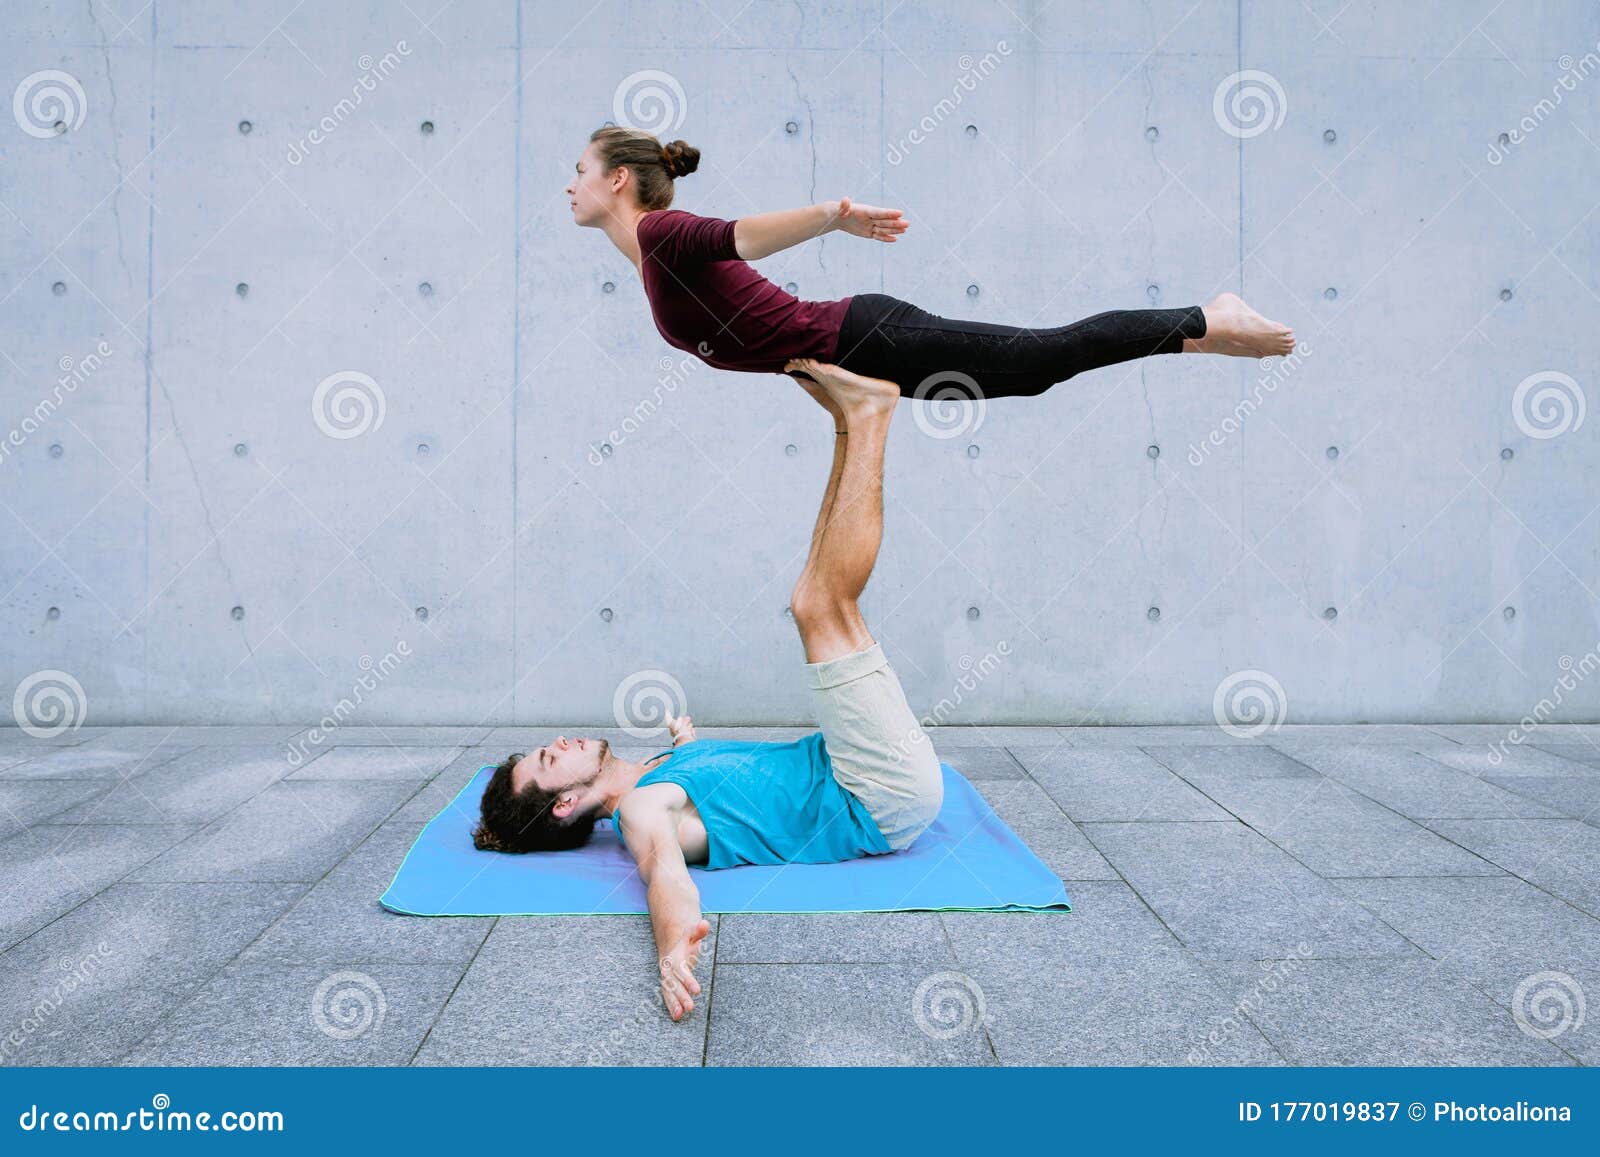 So You Want To Try Acroyoga? Get Started With These 4 Poses - Camilla Mia